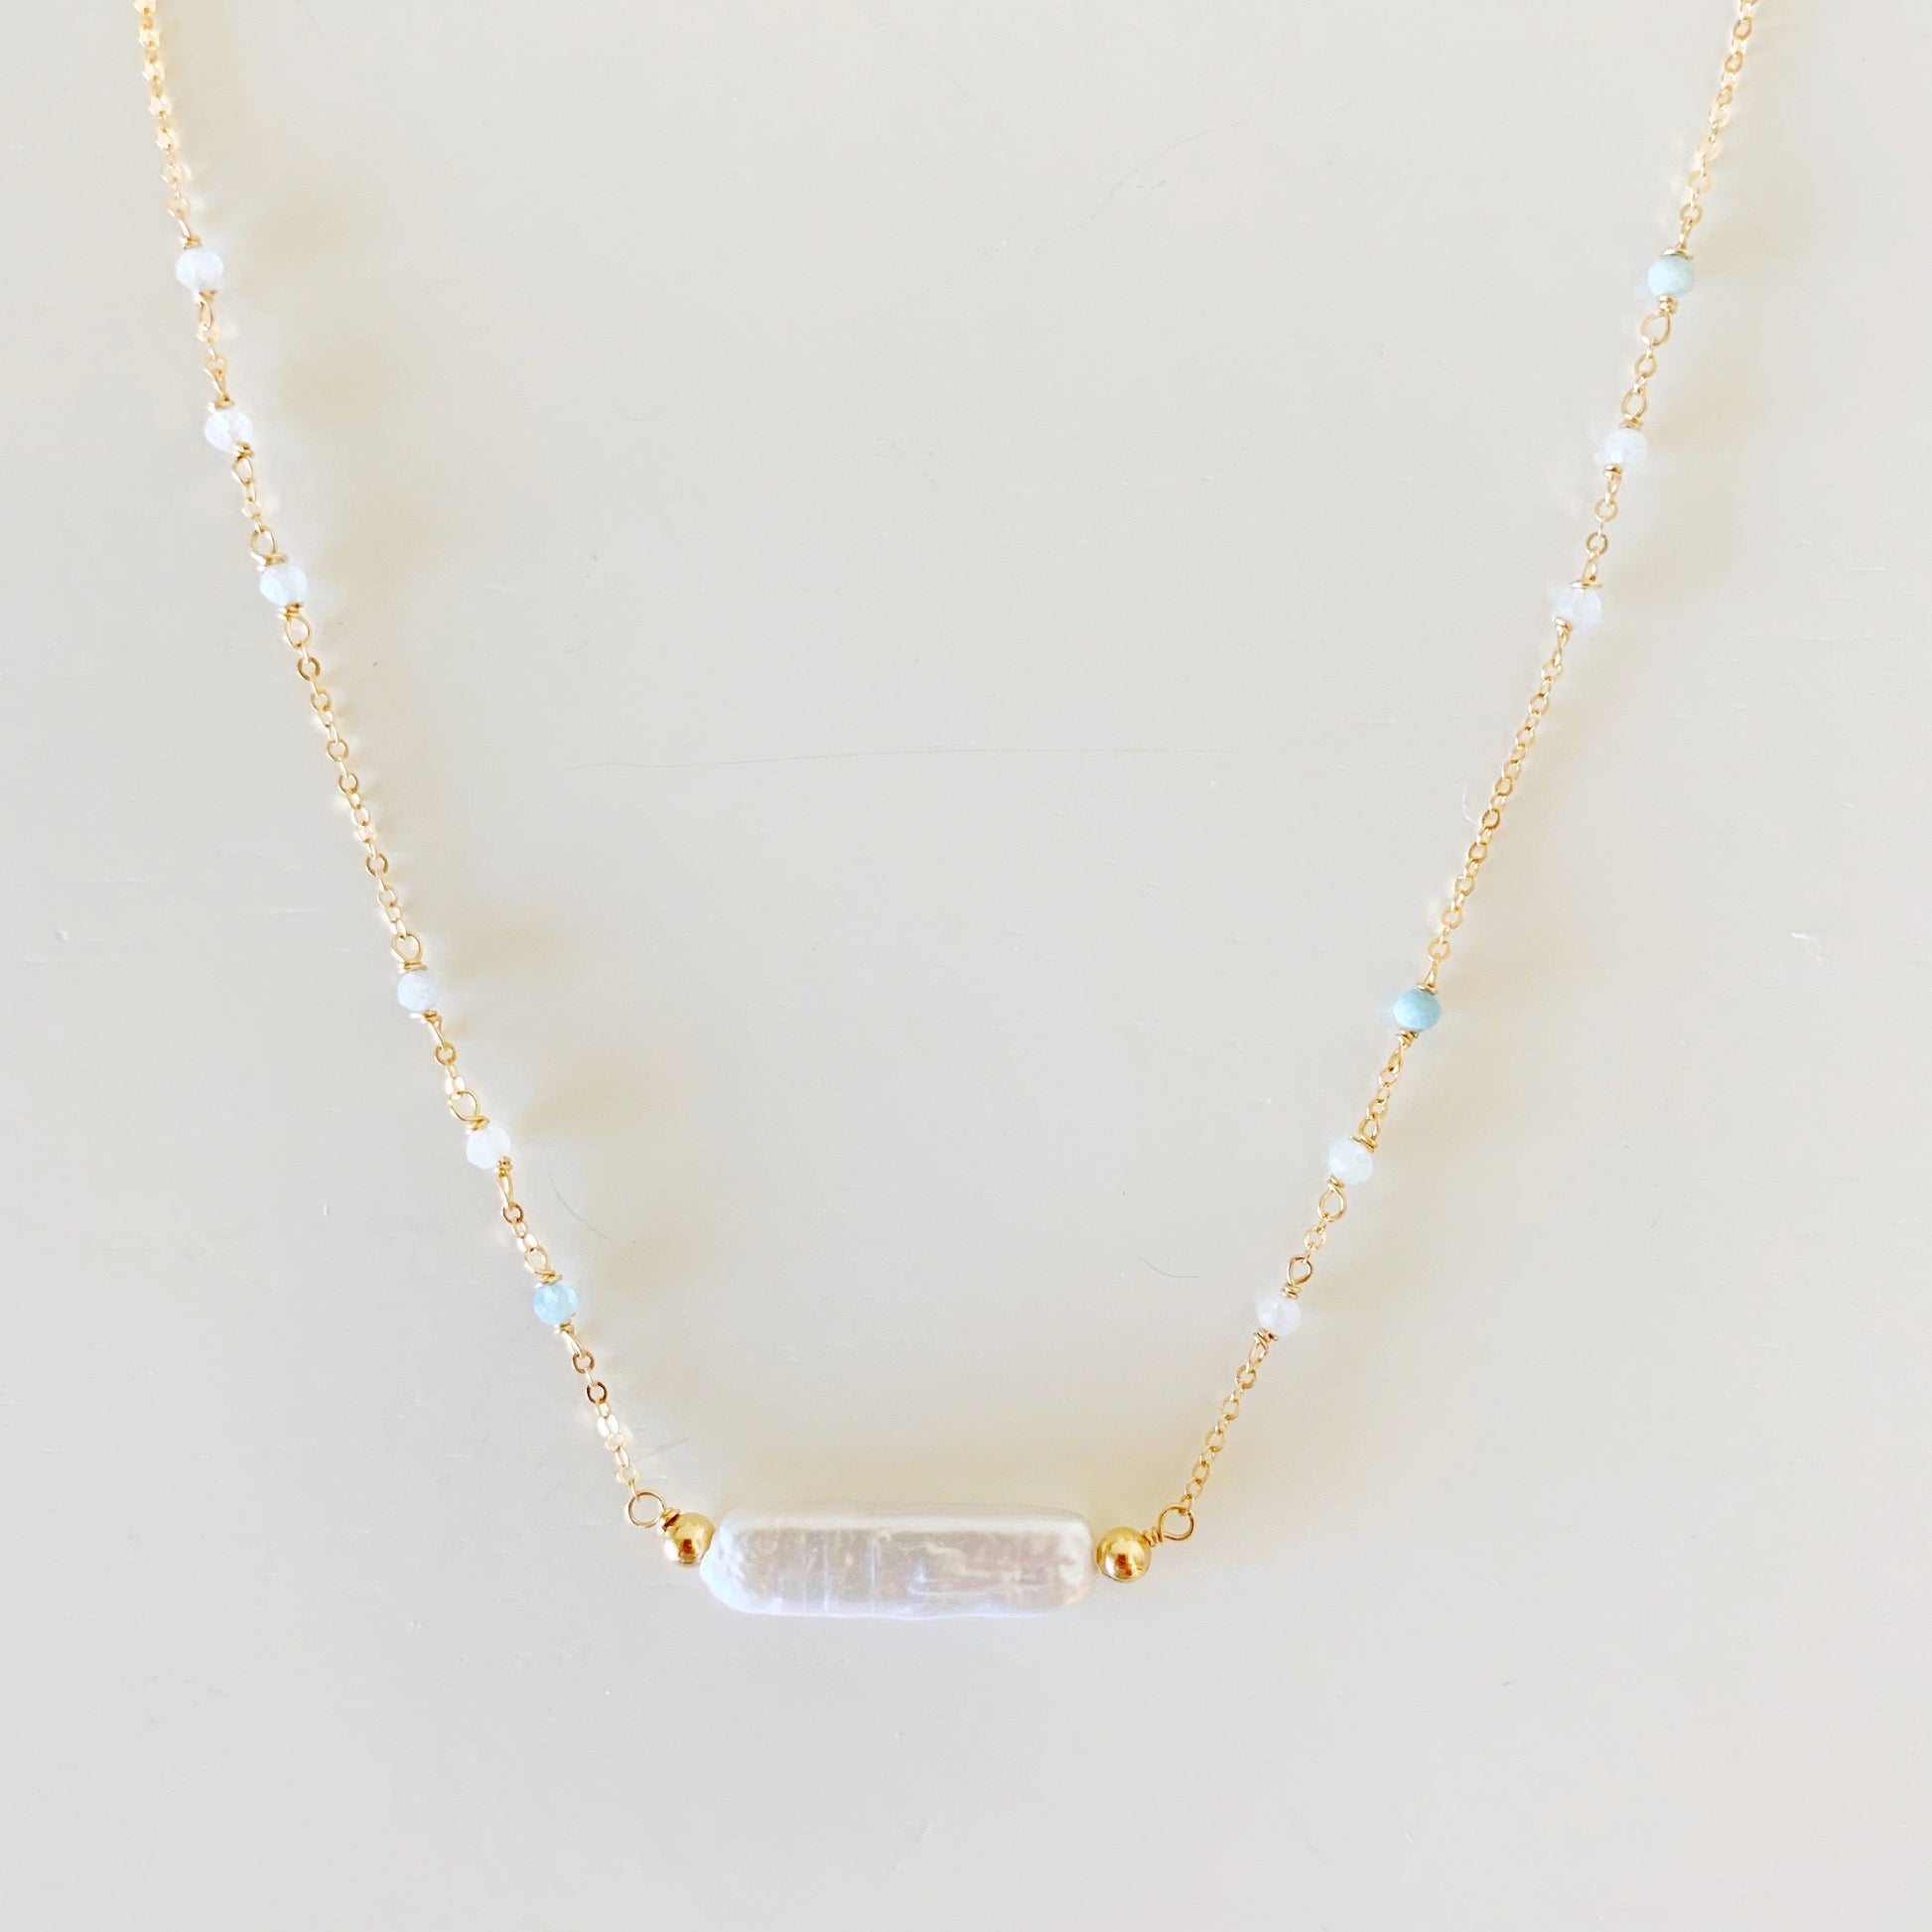 The truro necklace is designed with 14k gold filled chain and findings and a freshwater stick pearl at the center with  microfaceted aquamarine along the chain up the necklace. this necklace is photographed closer up on a white surface